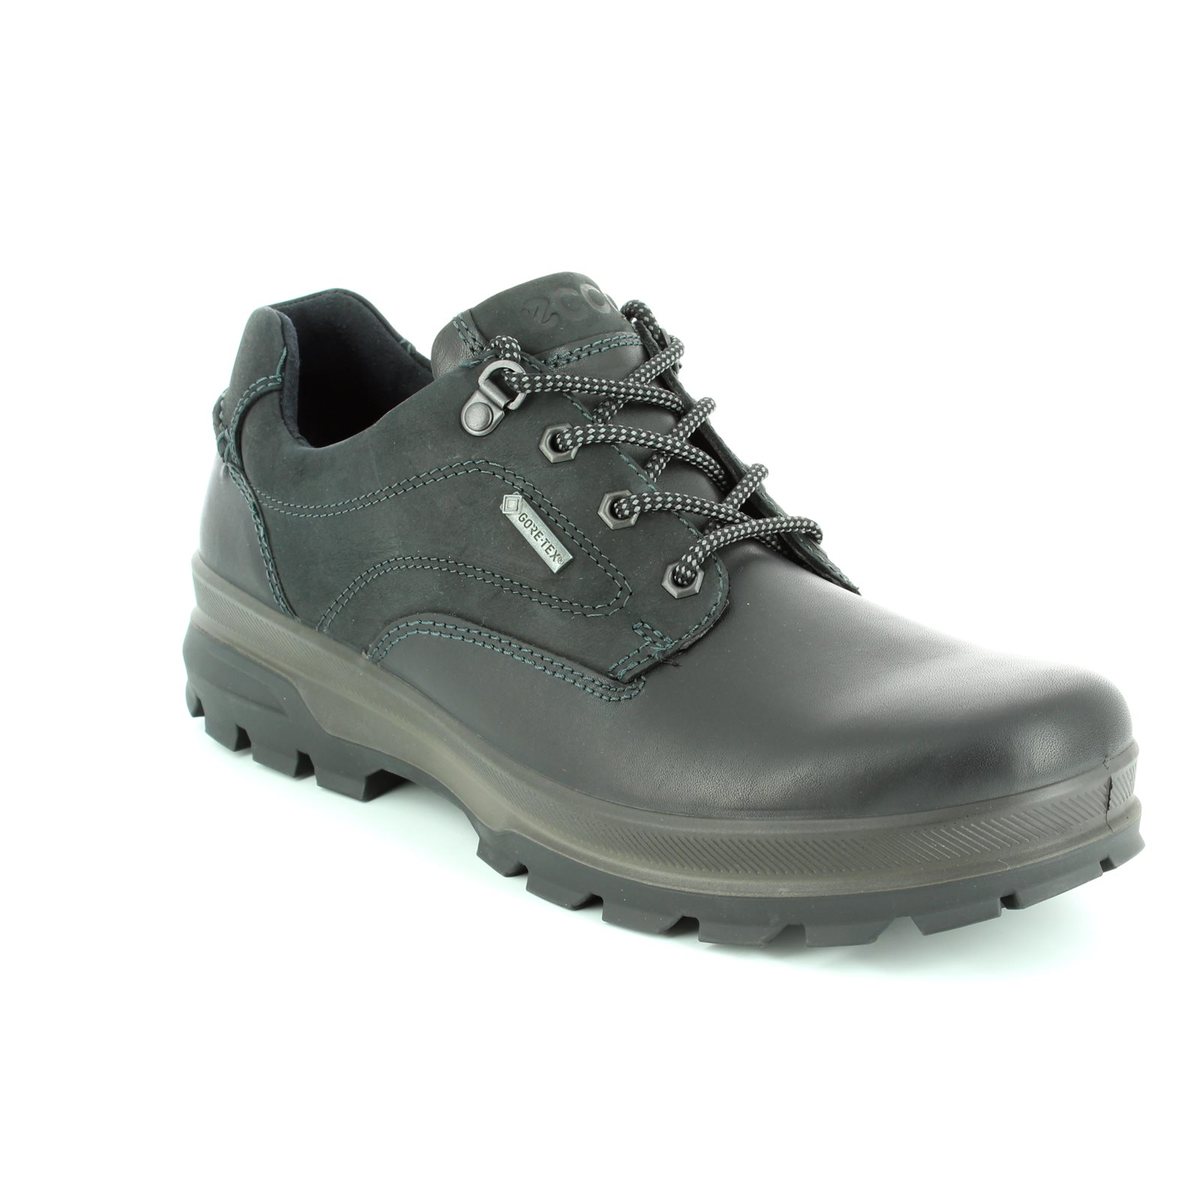 ECCO Rugged Gore Black Mens comfort shoes 838034-51707 in a Plain Leather in Size 39